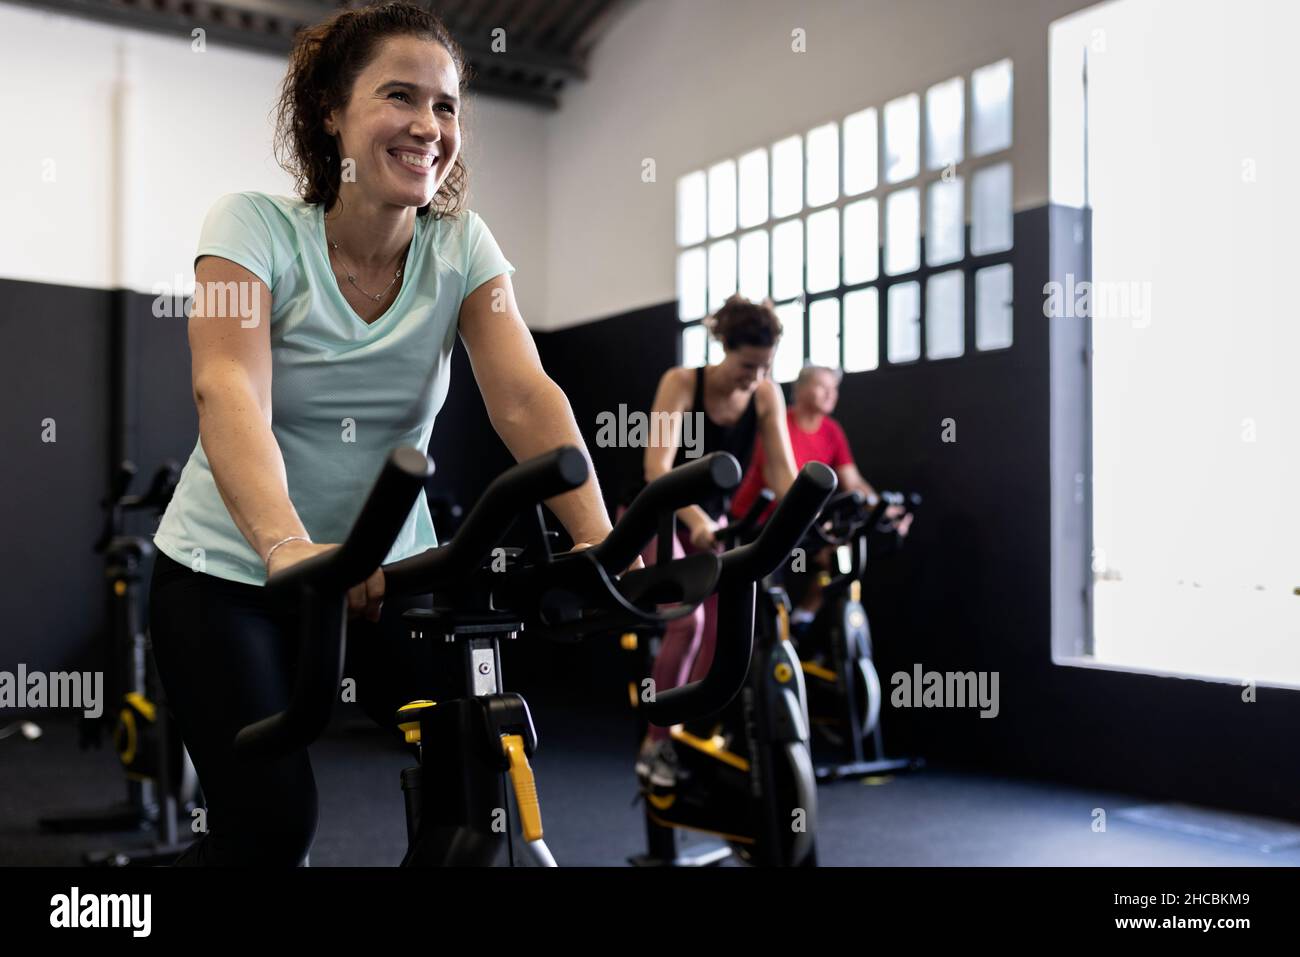 Sportsman cycling exercise bike at gym Stock Photo